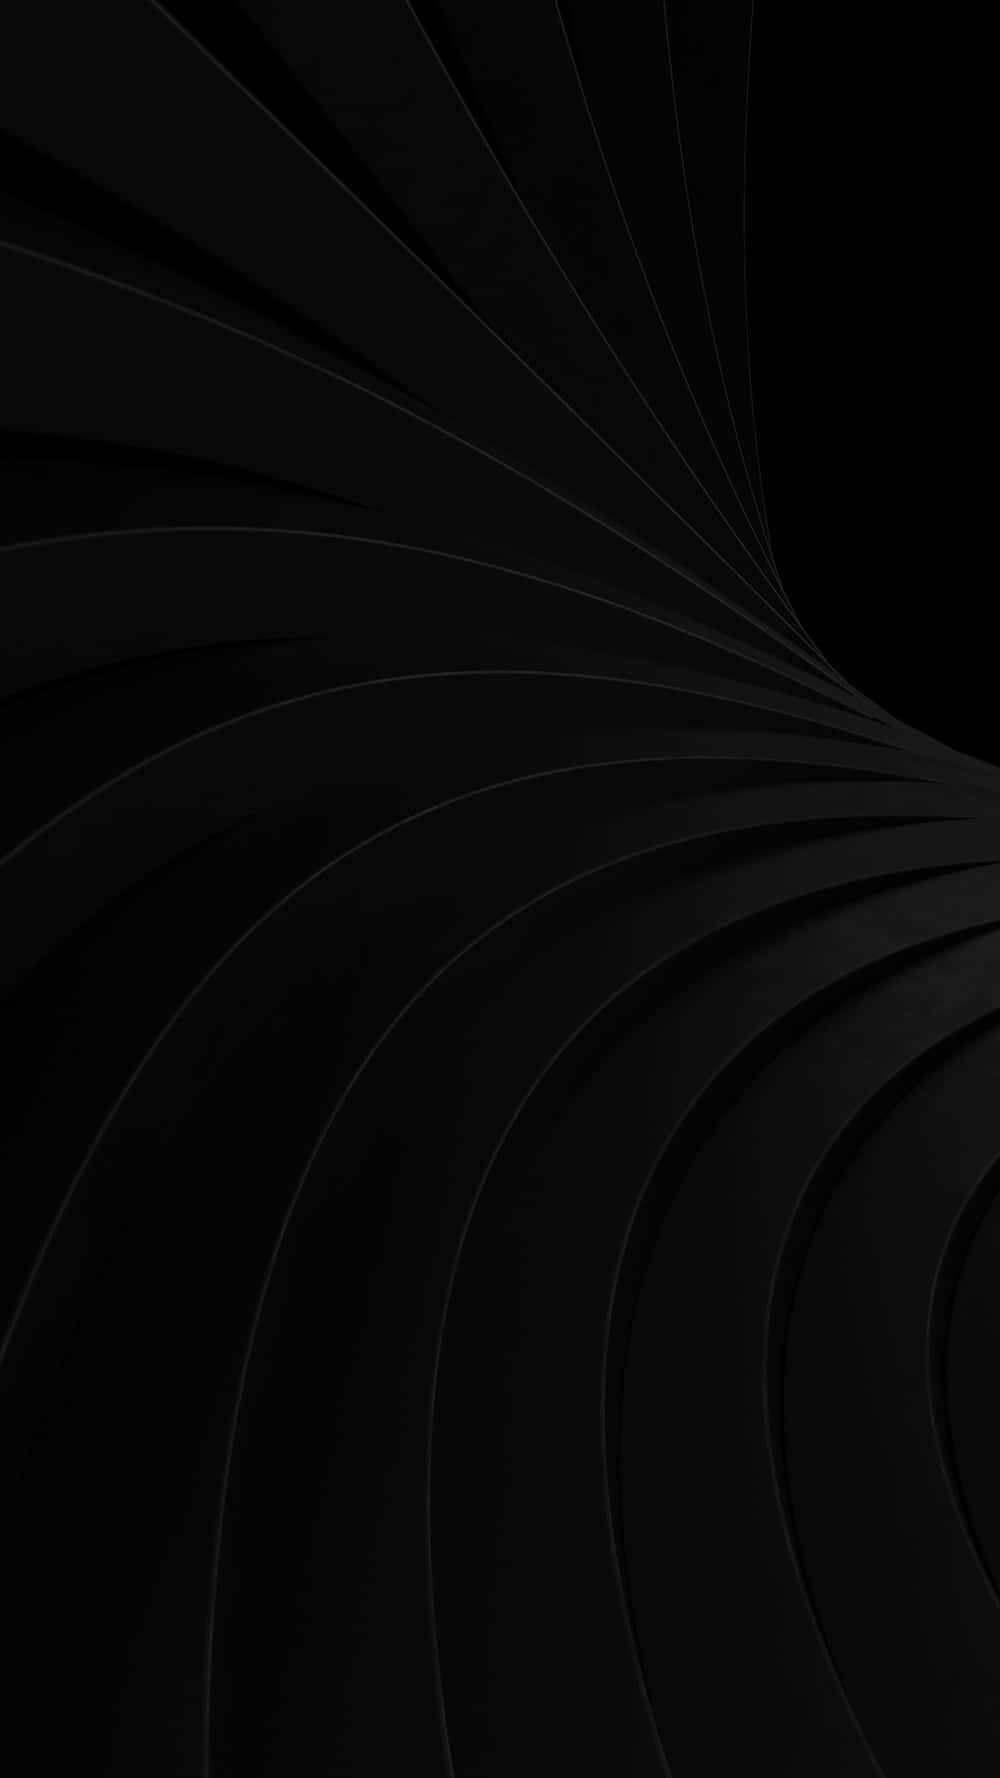 Download A Black Background With A Curve | Wallpapers.com